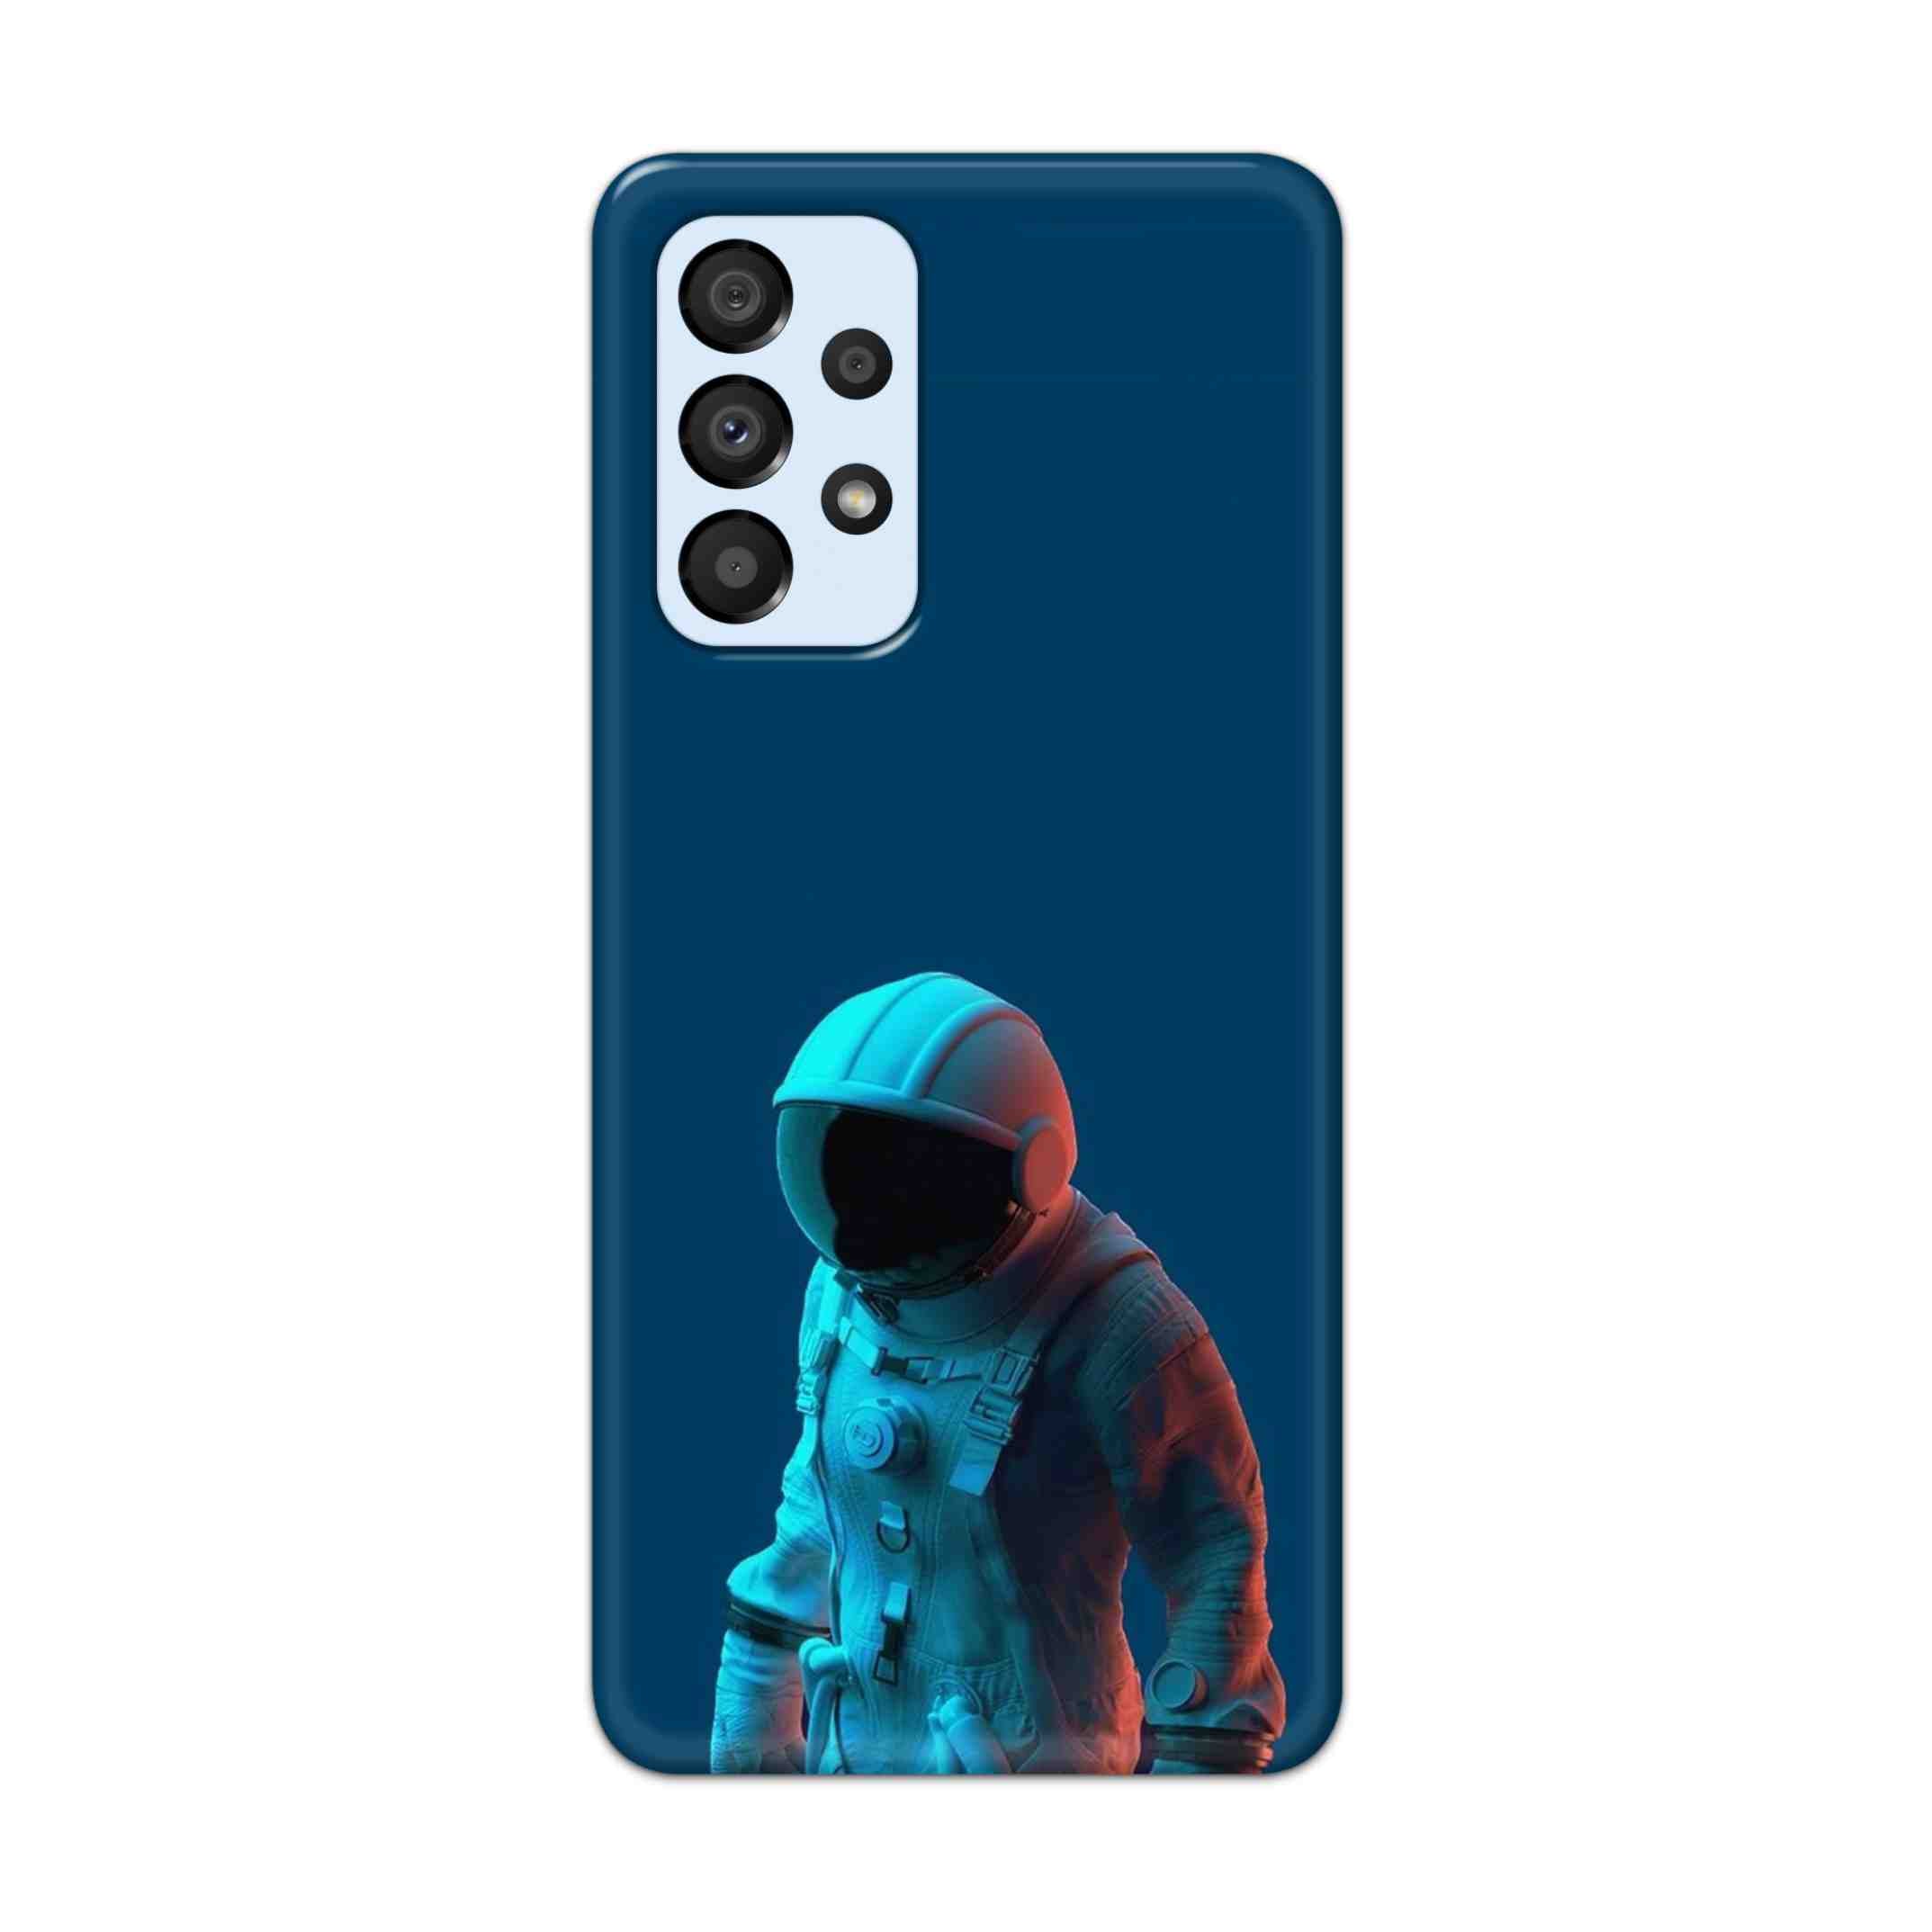 Buy Blue Astronaut Hard Back Mobile Phone Case Cover For Samsung A33 5G Online